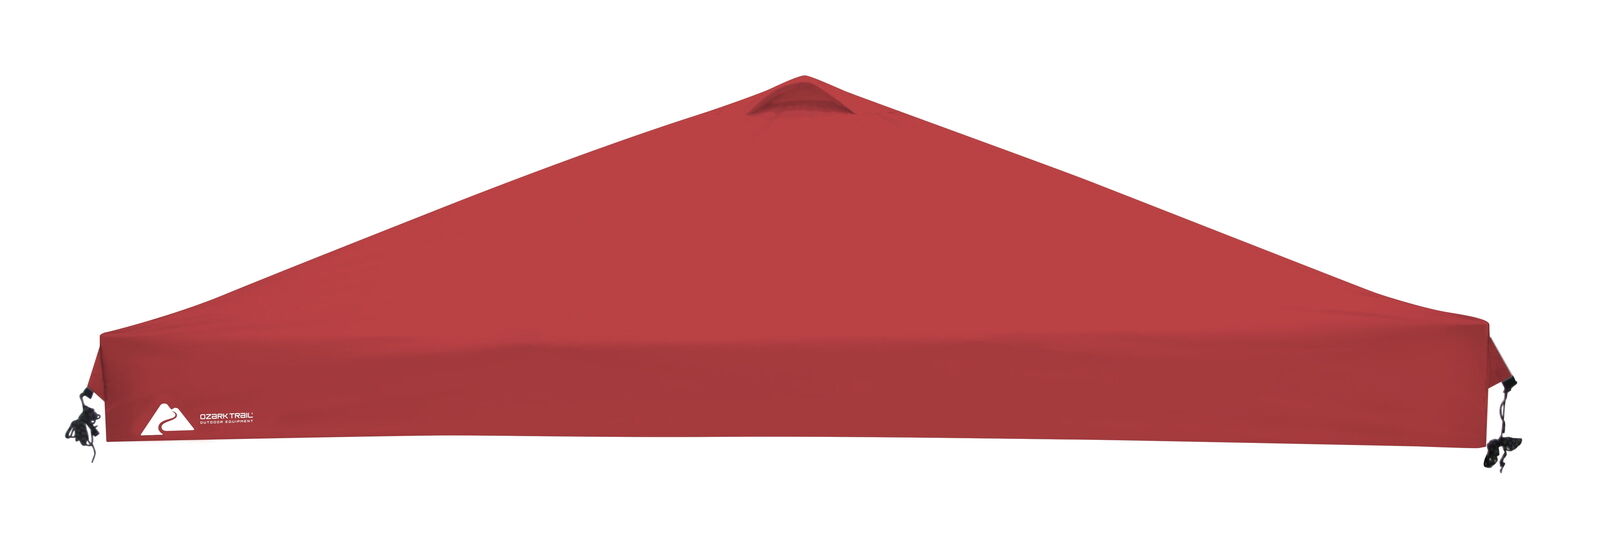 10' x 10' Top Replacement Cover for outdoor canopy, Red